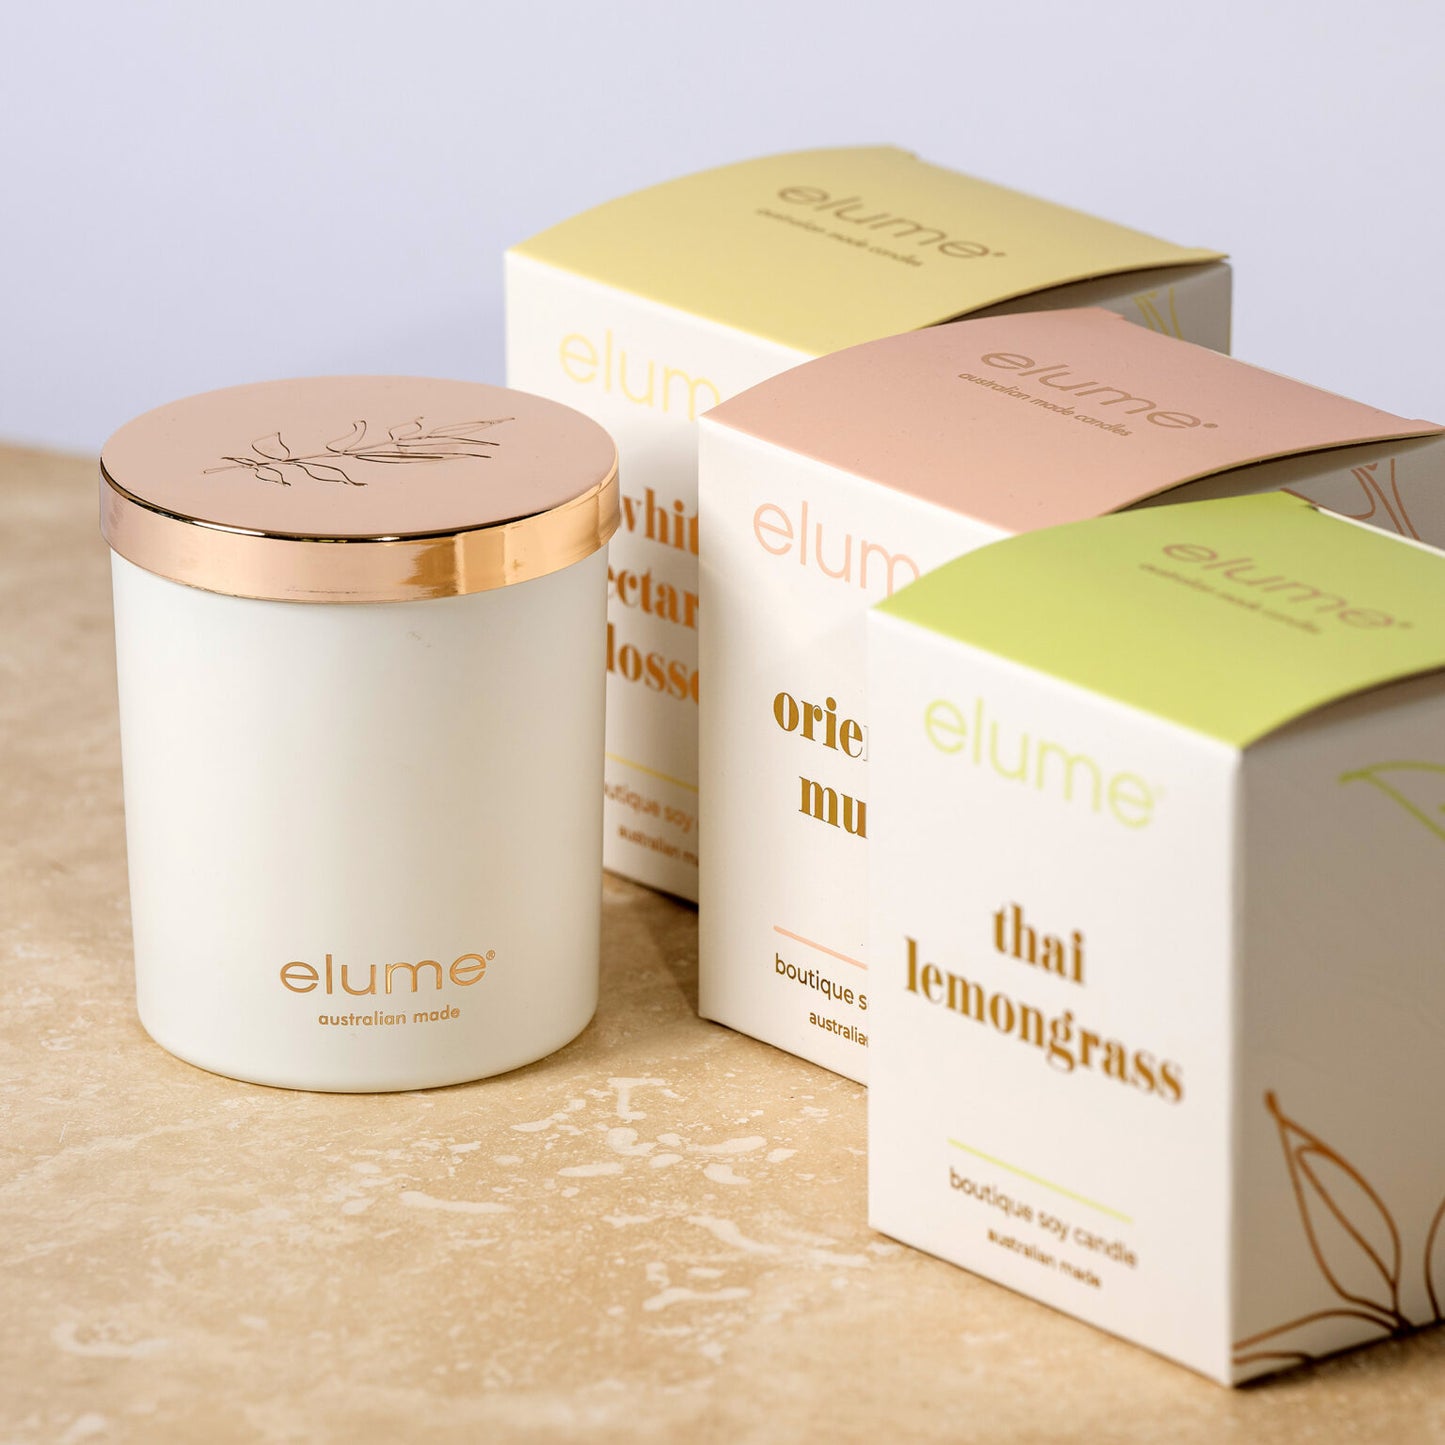 White Oak and Orchid: Elume Boutique Soy Candle